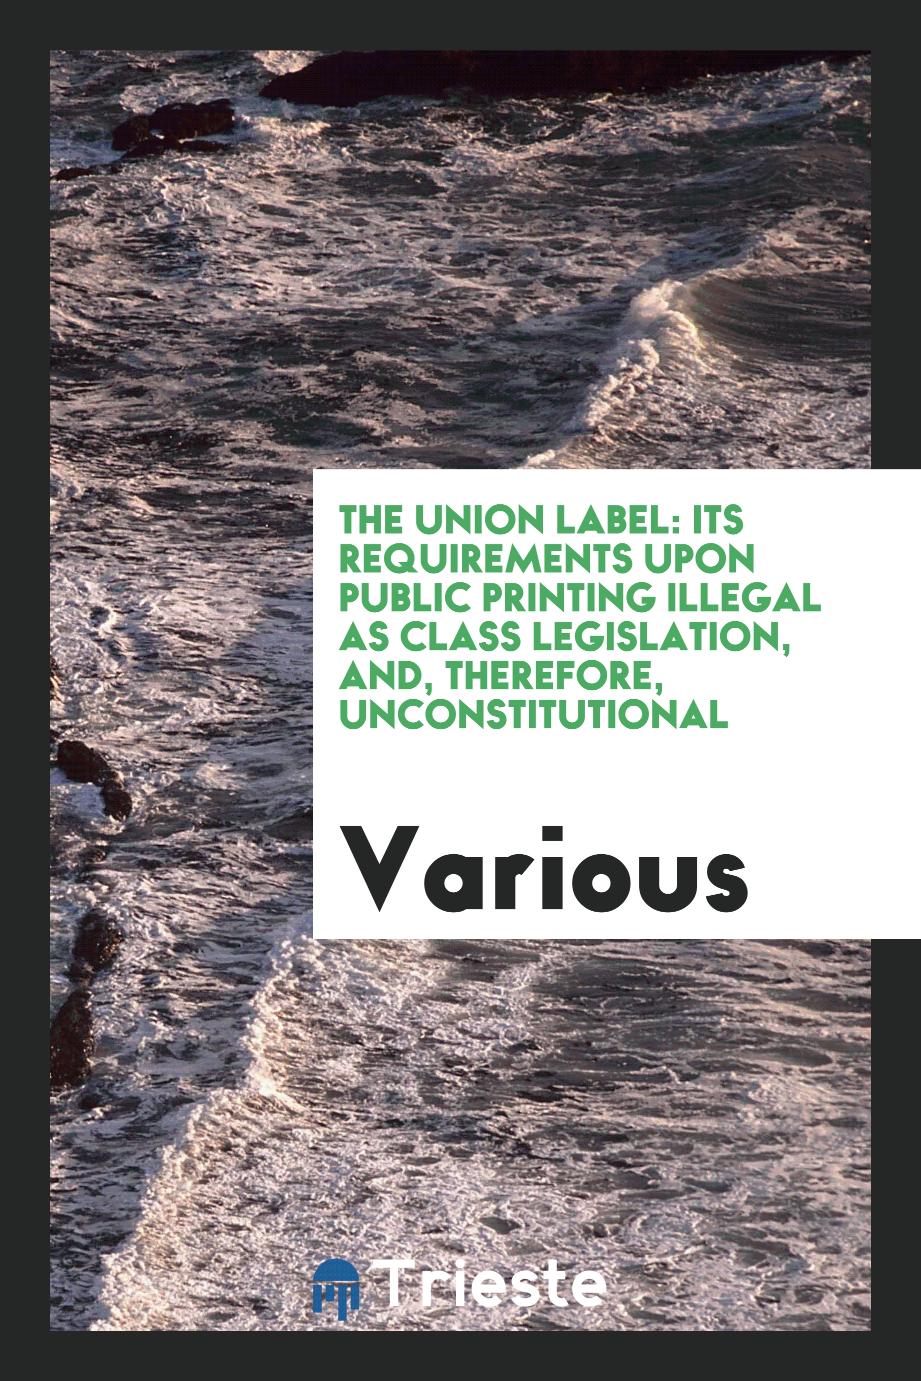 The Union Label: Its Requirements Upon Public Printing Illegal as Class Legislation, and, Therefore, Unconstitutional